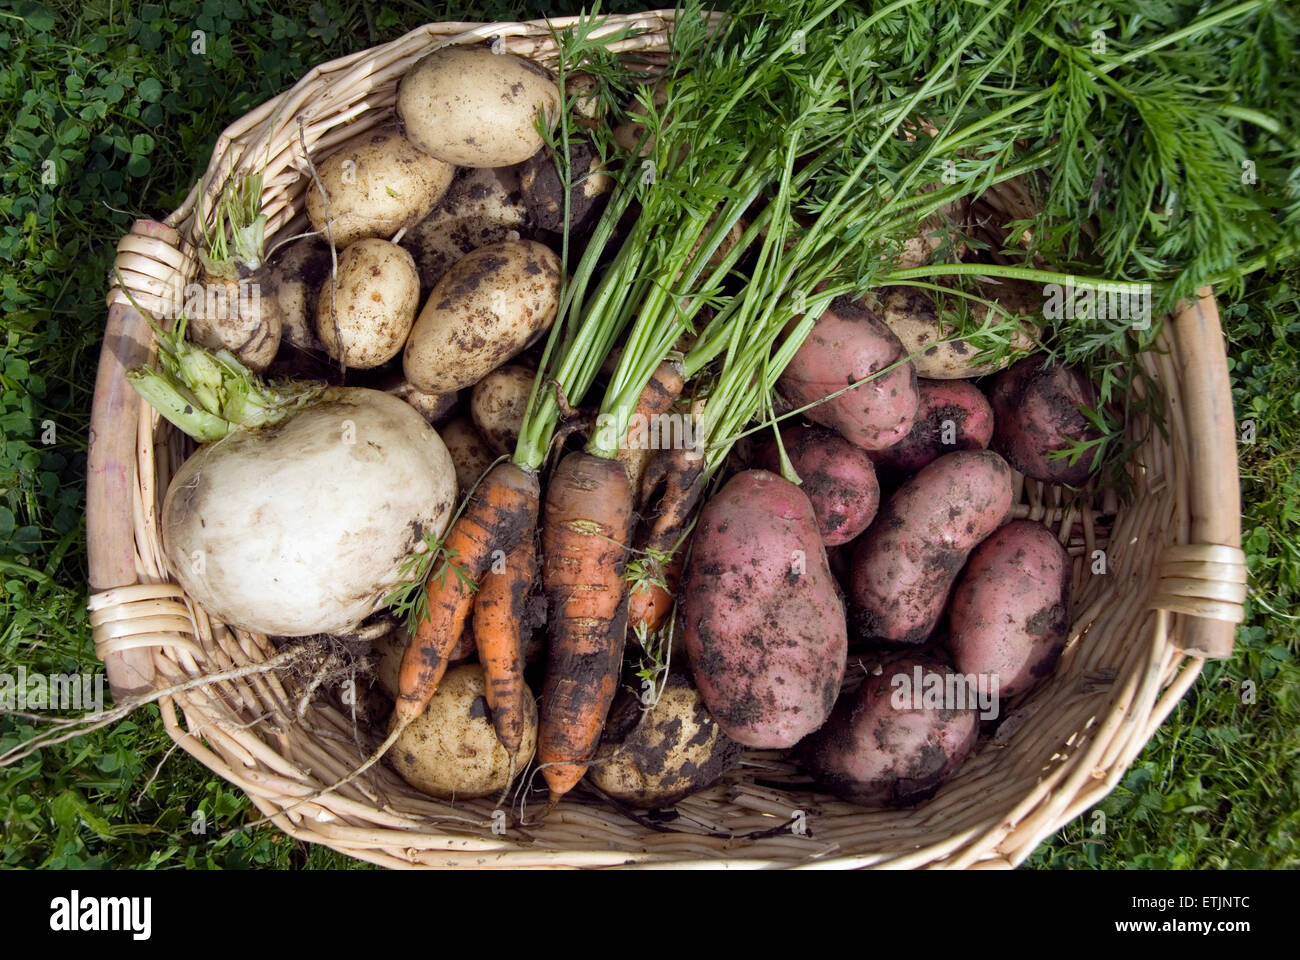 Muddy home grown red and white potatoes, turnip and carrots in a wicker basket. Garden harvest, UK Stock Photo